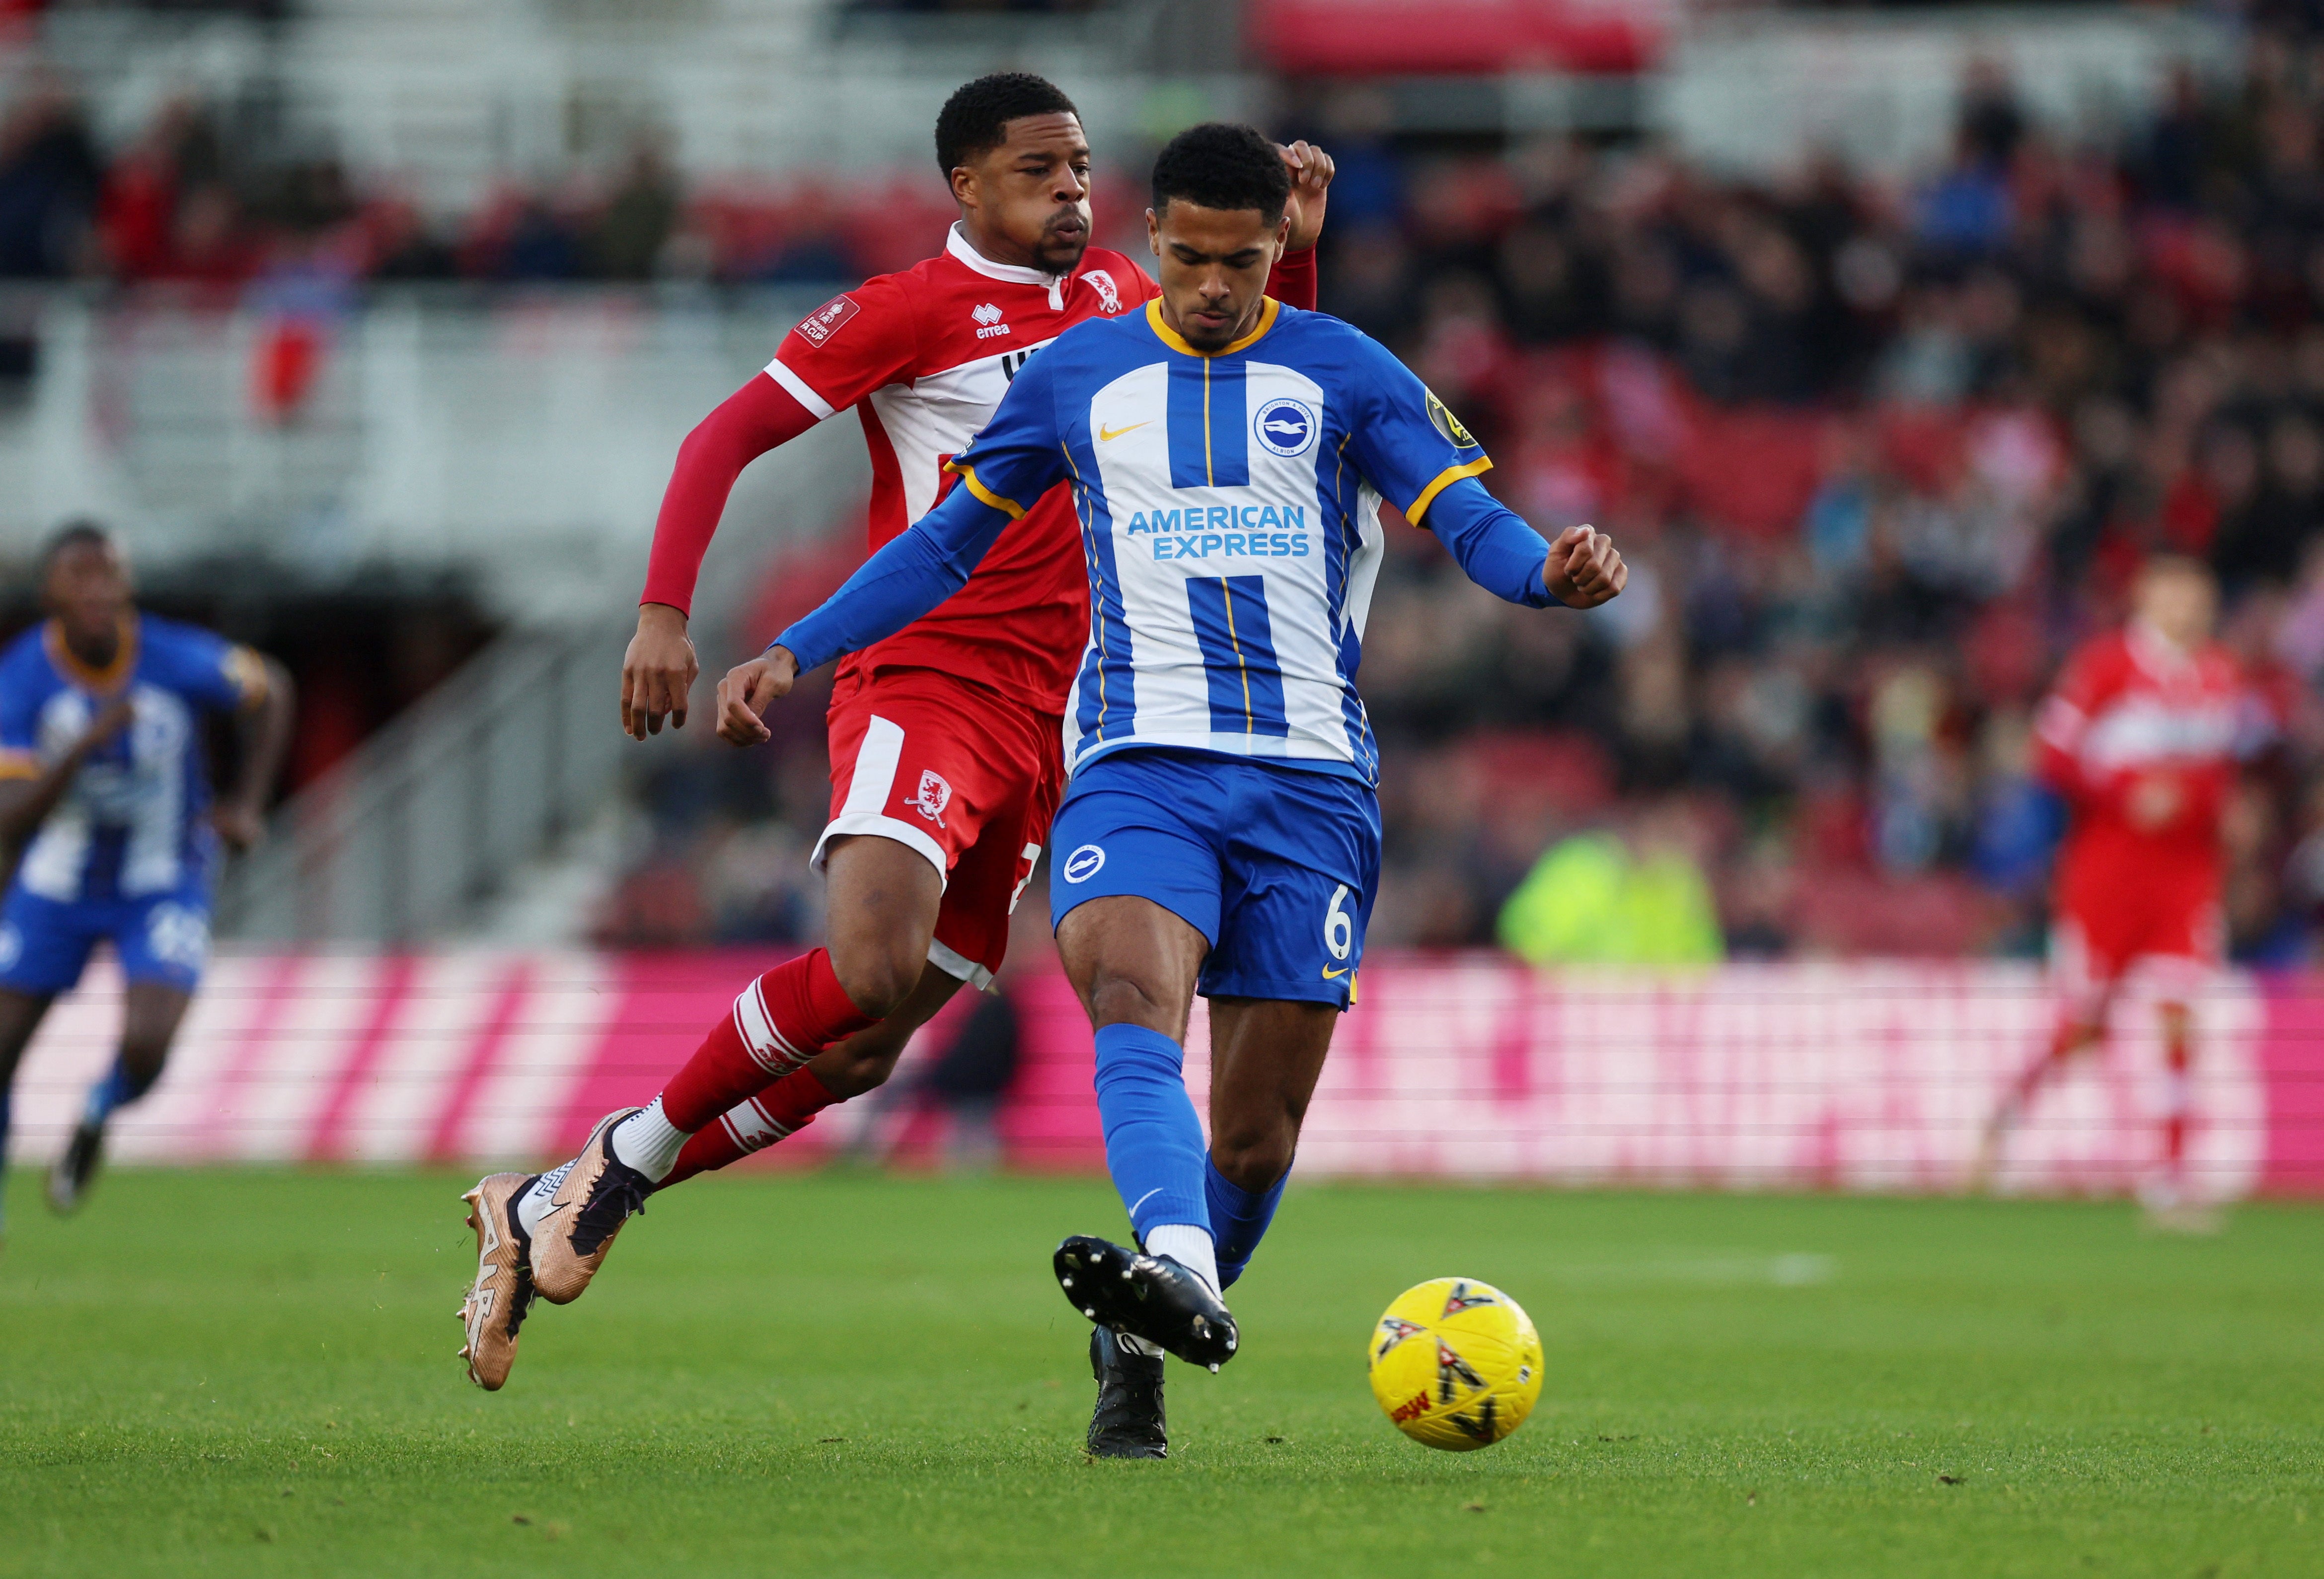 Brighton’s Levi Colwill on the ball against Middlesbrough